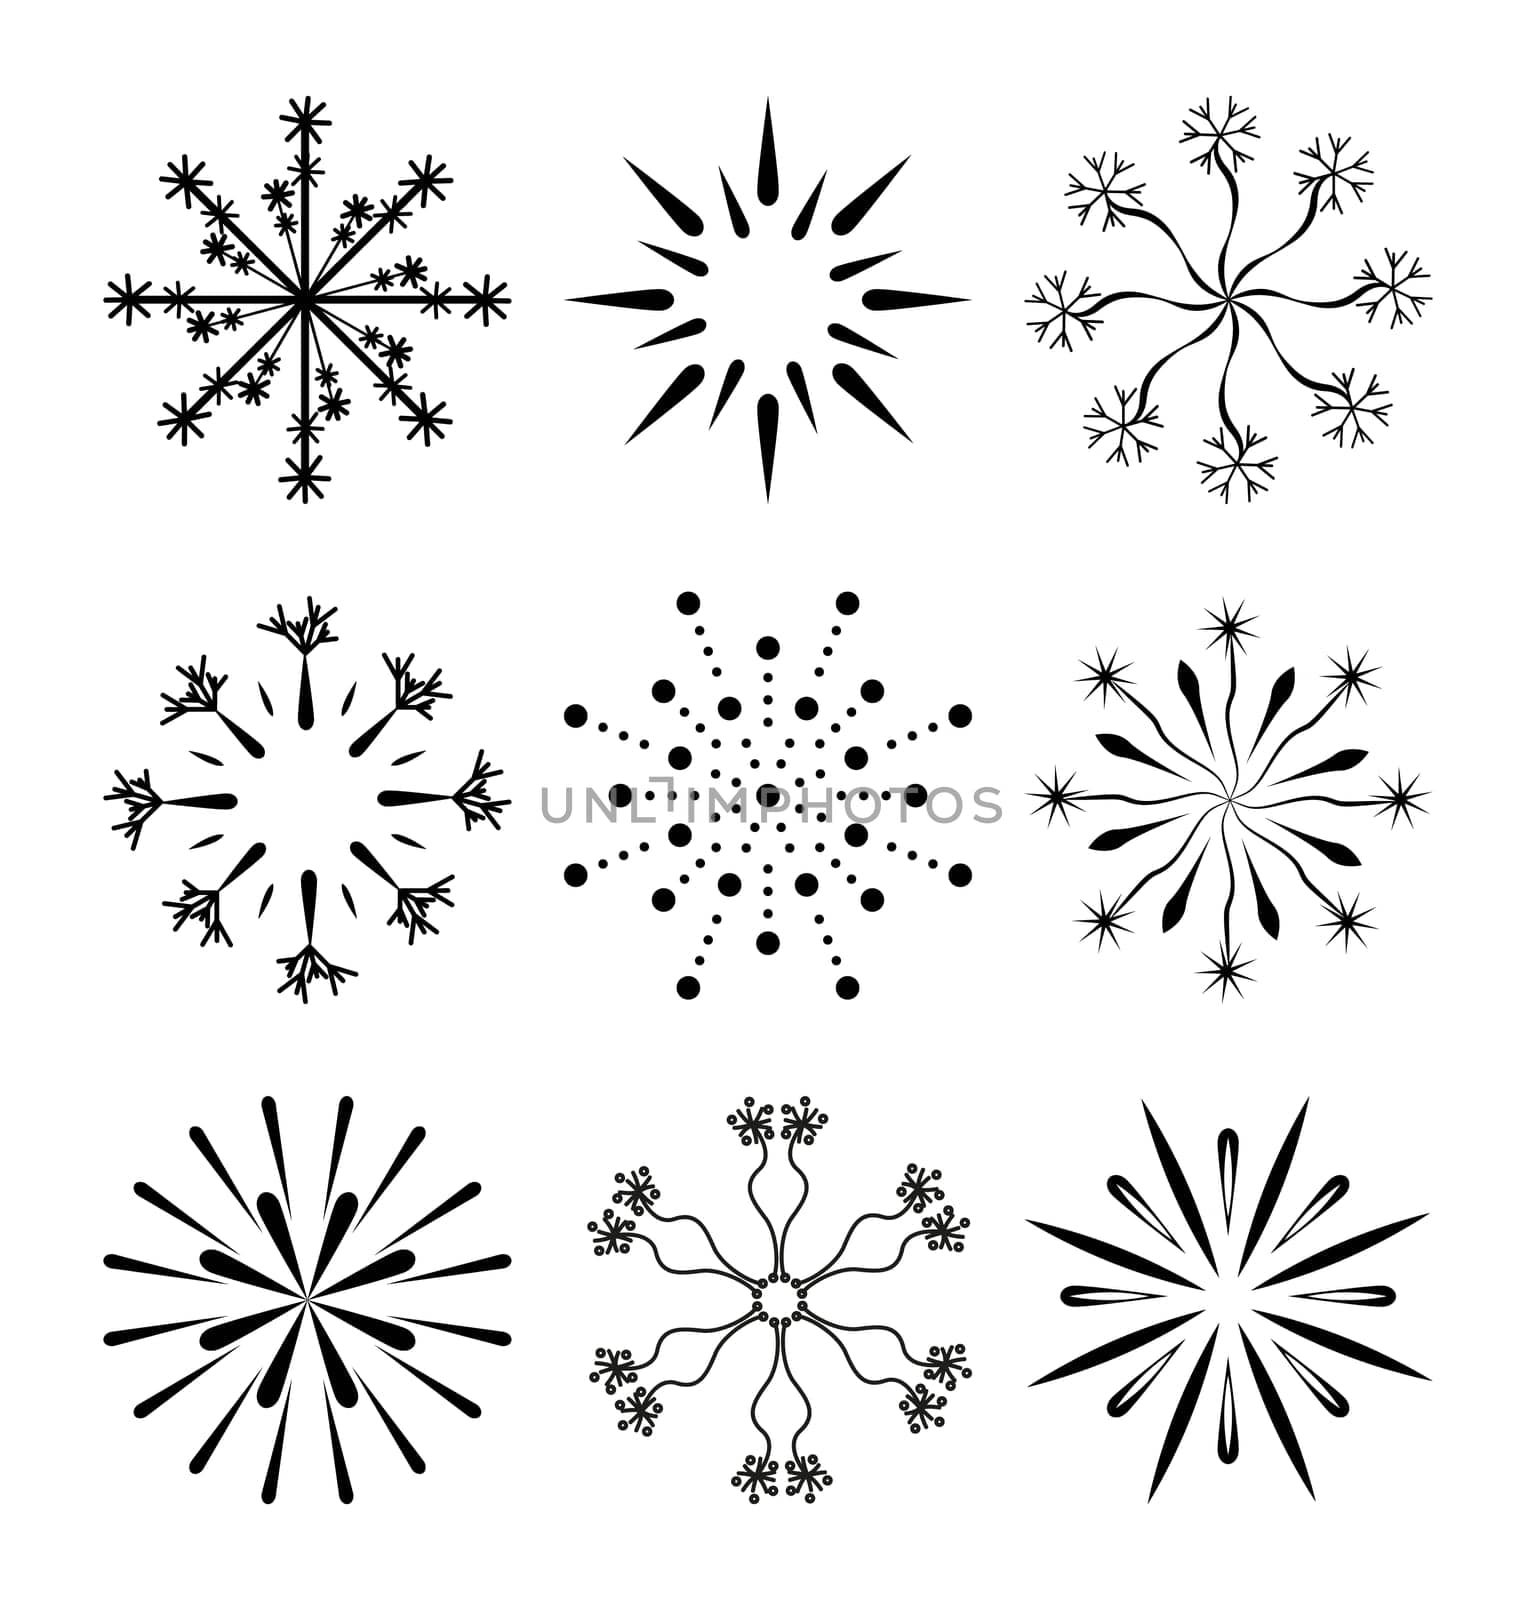 Firework line icon set isolated on white. Different black symbol for festival or carnival explosion, firecracker. Jpeg burst contour pattern for celebration, party